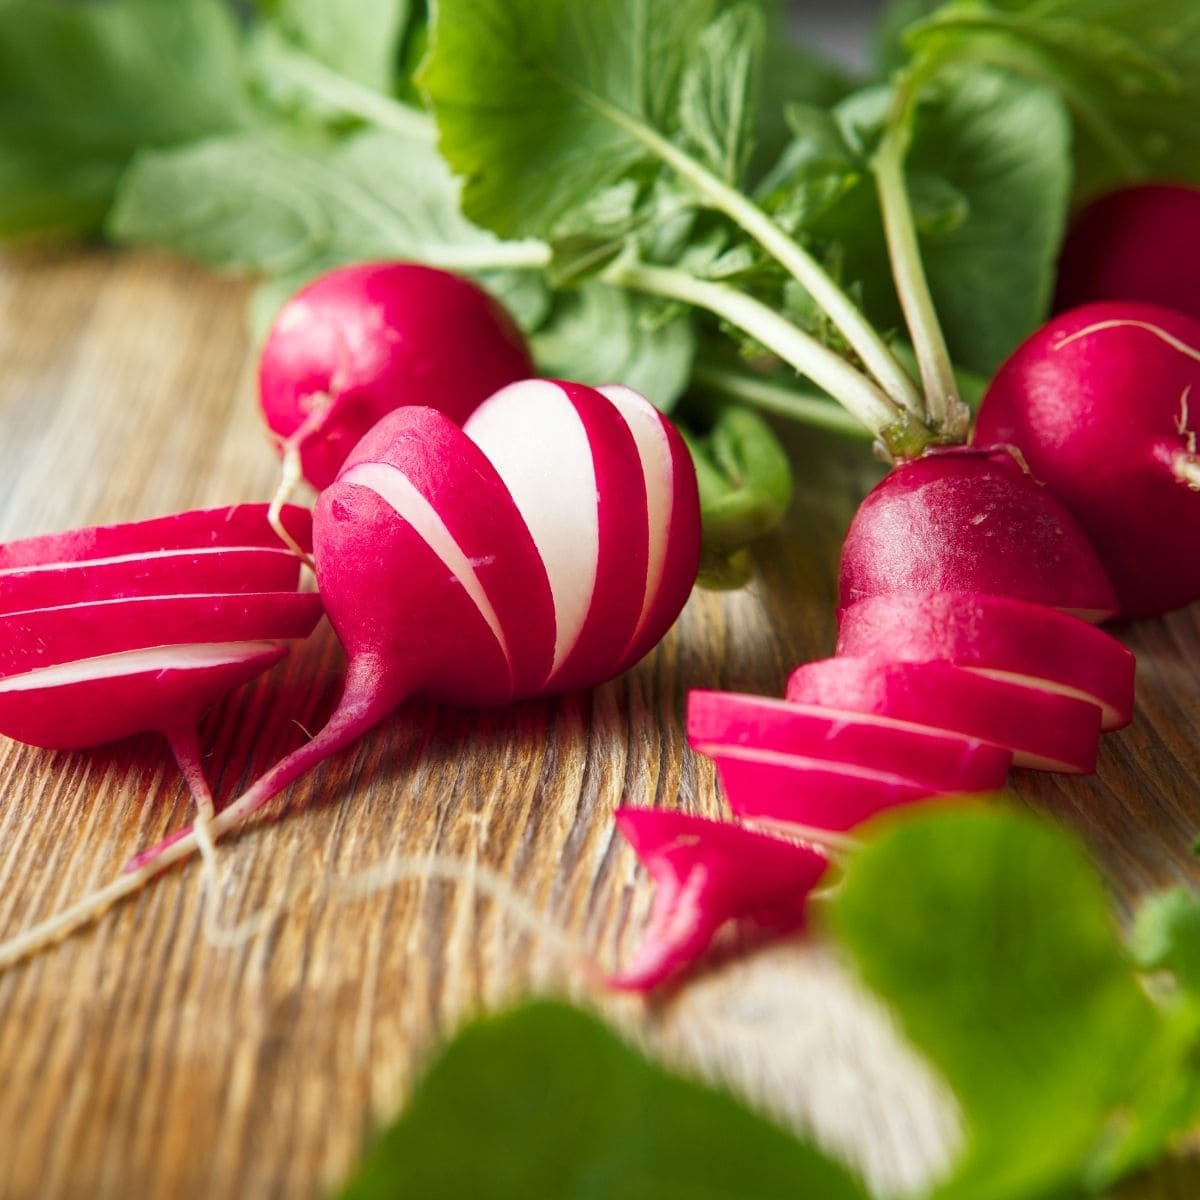 sliced radishes with leaves still on.